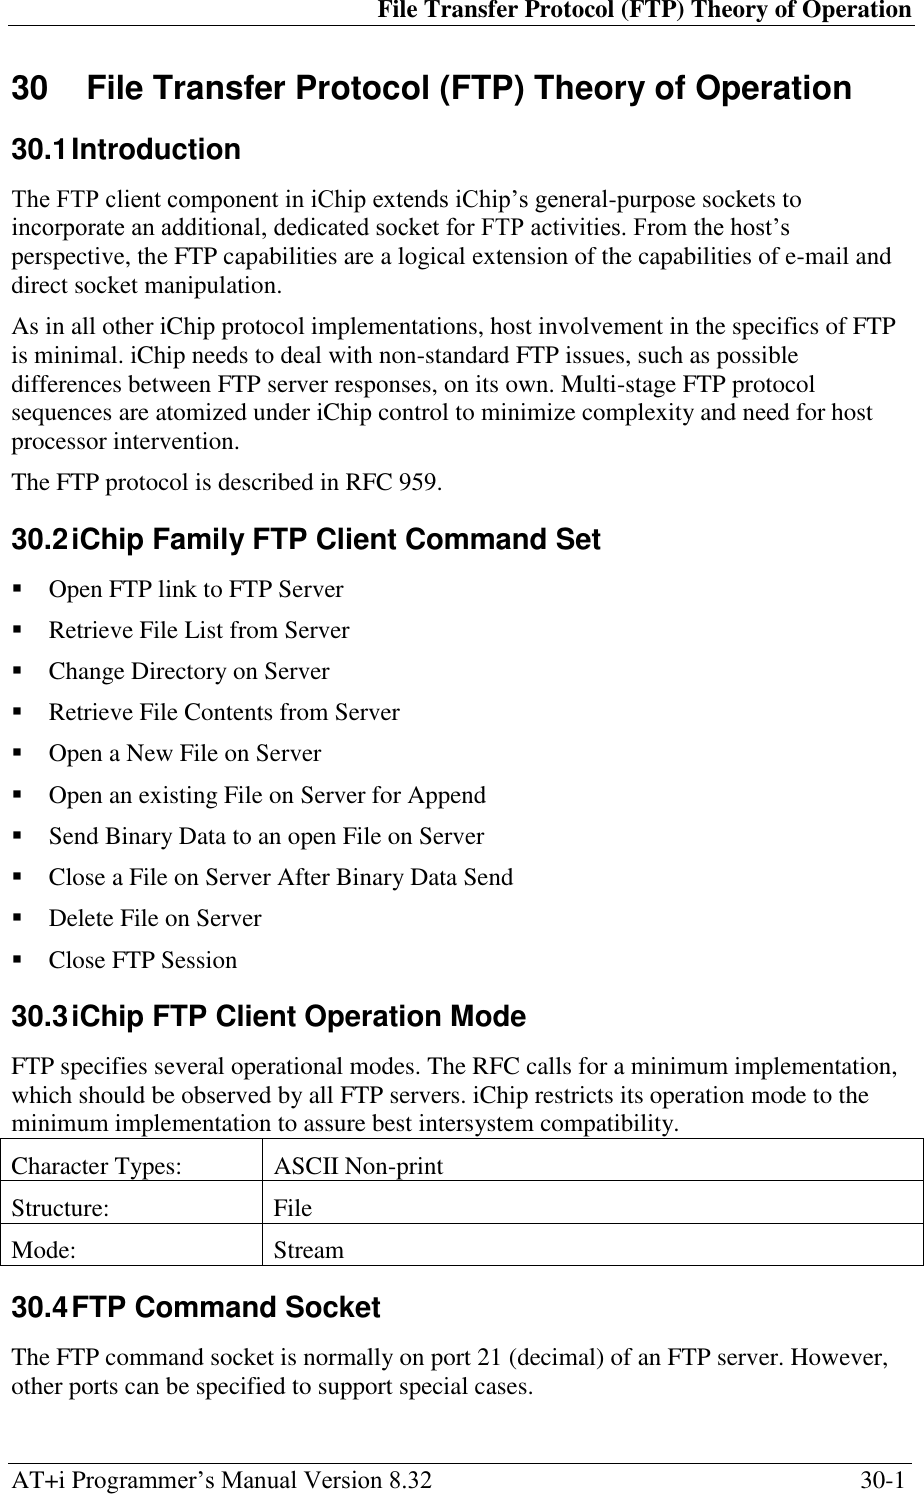 File Transfer Protocol (FTP) Theory of Operation AT+i Programmer‘s Manual Version 8.32  30-1 30  File Transfer Protocol (FTP) Theory of Operation 30.1 Introduction The FTP client component in iChip extends iChip‘s general-purpose sockets to incorporate an additional, dedicated socket for FTP activities. From the host‘s perspective, the FTP capabilities are a logical extension of the capabilities of e-mail and direct socket manipulation. As in all other iChip protocol implementations, host involvement in the specifics of FTP is minimal. iChip needs to deal with non-standard FTP issues, such as possible differences between FTP server responses, on its own. Multi-stage FTP protocol sequences are atomized under iChip control to minimize complexity and need for host processor intervention. The FTP protocol is described in RFC 959. 30.2 iChip Family FTP Client Command Set  Open FTP link to FTP Server  Retrieve File List from Server  Change Directory on Server  Retrieve File Contents from Server  Open a New File on Server  Open an existing File on Server for Append  Send Binary Data to an open File on Server  Close a File on Server After Binary Data Send  Delete File on Server  Close FTP Session 30.3 iChip FTP Client Operation Mode FTP specifies several operational modes. The RFC calls for a minimum implementation, which should be observed by all FTP servers. iChip restricts its operation mode to the minimum implementation to assure best intersystem compatibility. Character Types: ASCII Non-print Structure: File Mode: Stream 30.4 FTP Command Socket The FTP command socket is normally on port 21 (decimal) of an FTP server. However, other ports can be specified to support special cases. 